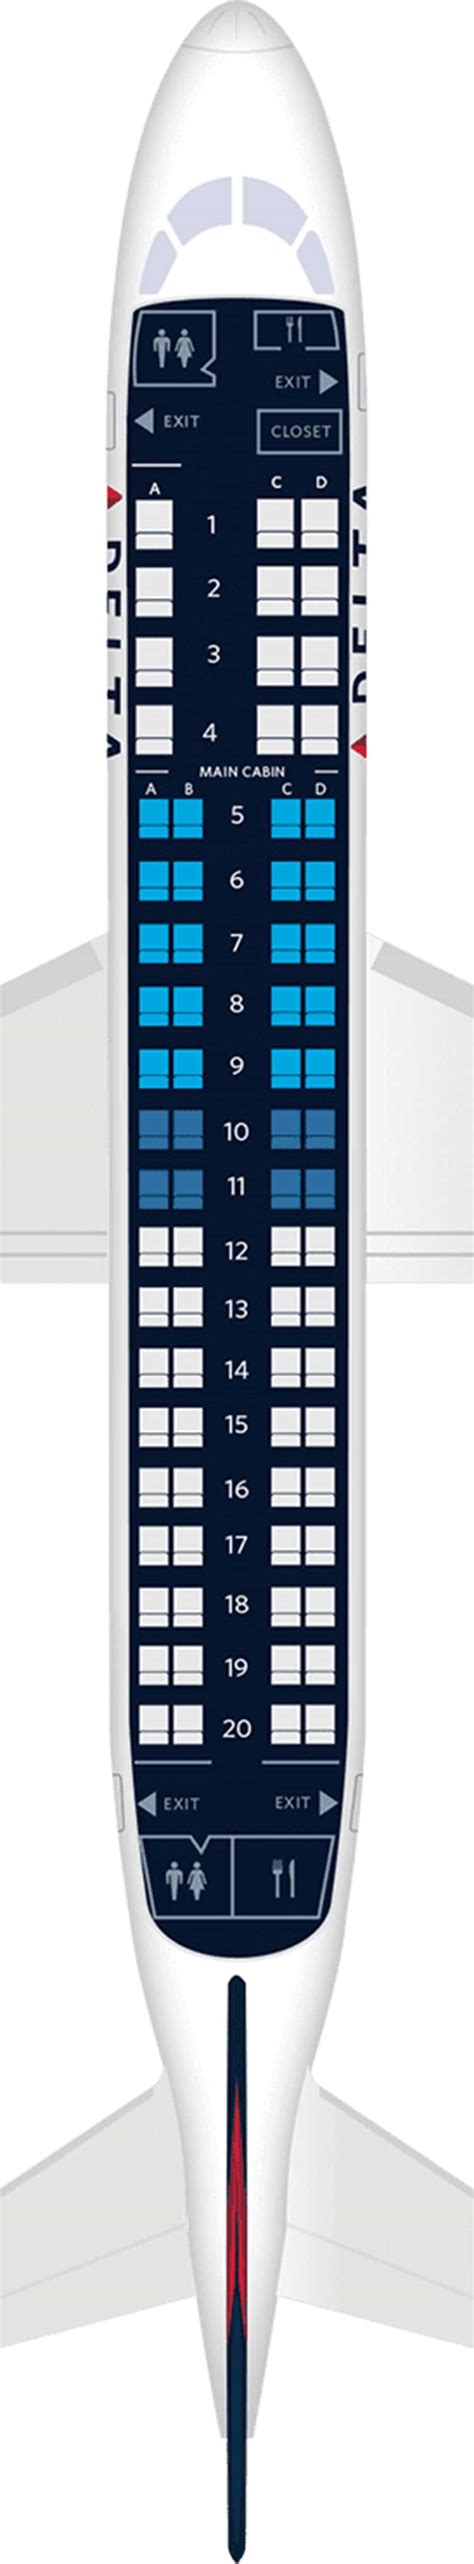 Embraer ERJ-175 Airbus A330-300 (333) Airbus A330-300 (333) In-page Links. Seat Specifications, Go to footer note; Seat Map, Go to footer note; Aircraft Specification ... Seat Map; EXITS (8) GALLEYS (8) LAVATORIES (8) (2 ACCESSIBLE) DELTA ONE. DELTA PREMIUM SELECT. DELTA COMFORT+. PREFERRED. MAIN CABIN. Aircraft Specifications.. 